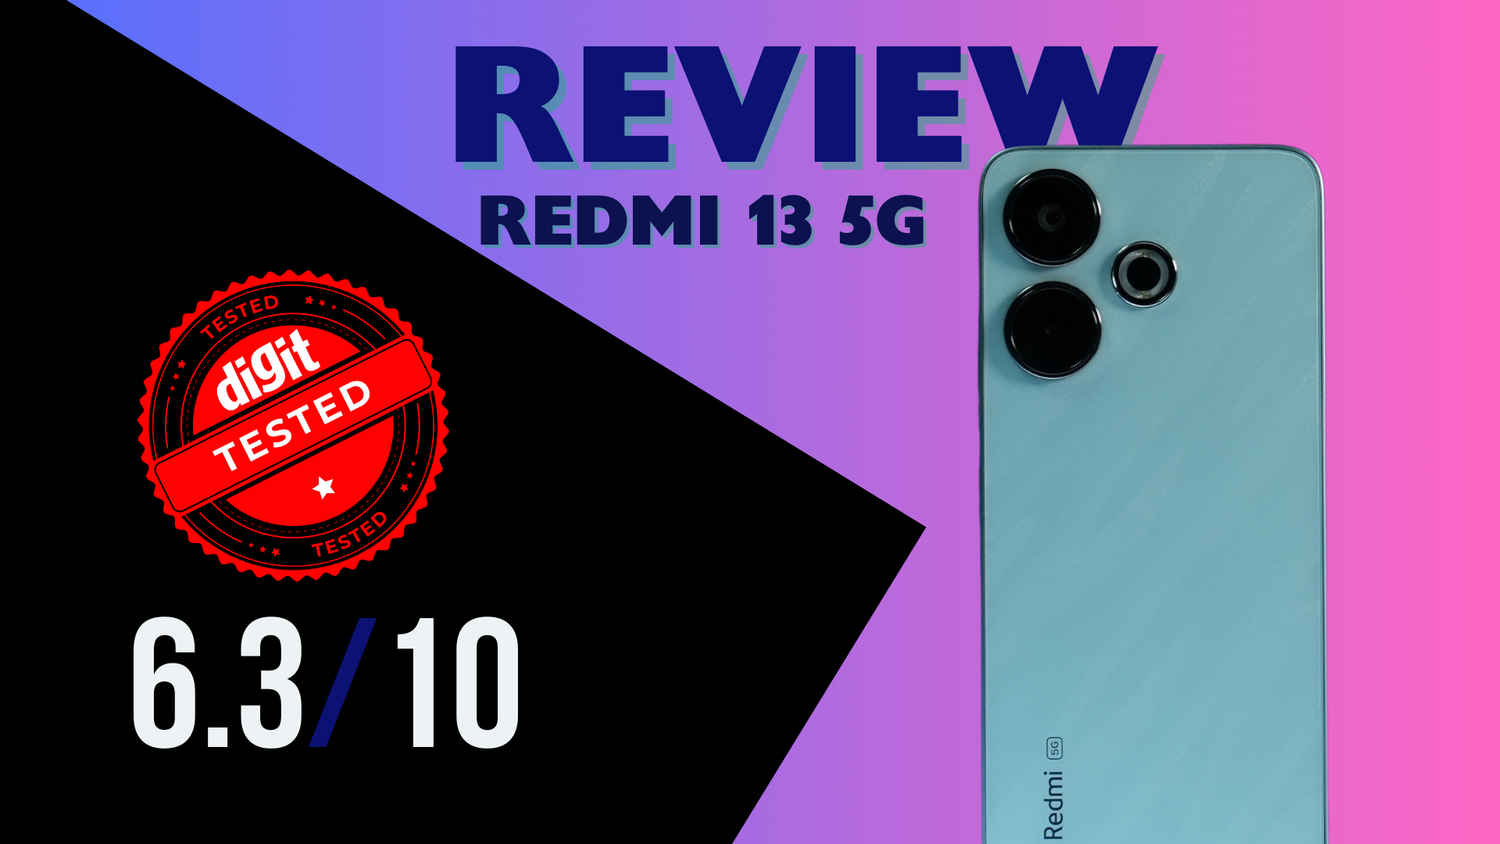 Redmi 13 5G Review: Affordable 5G phone with room for improvement